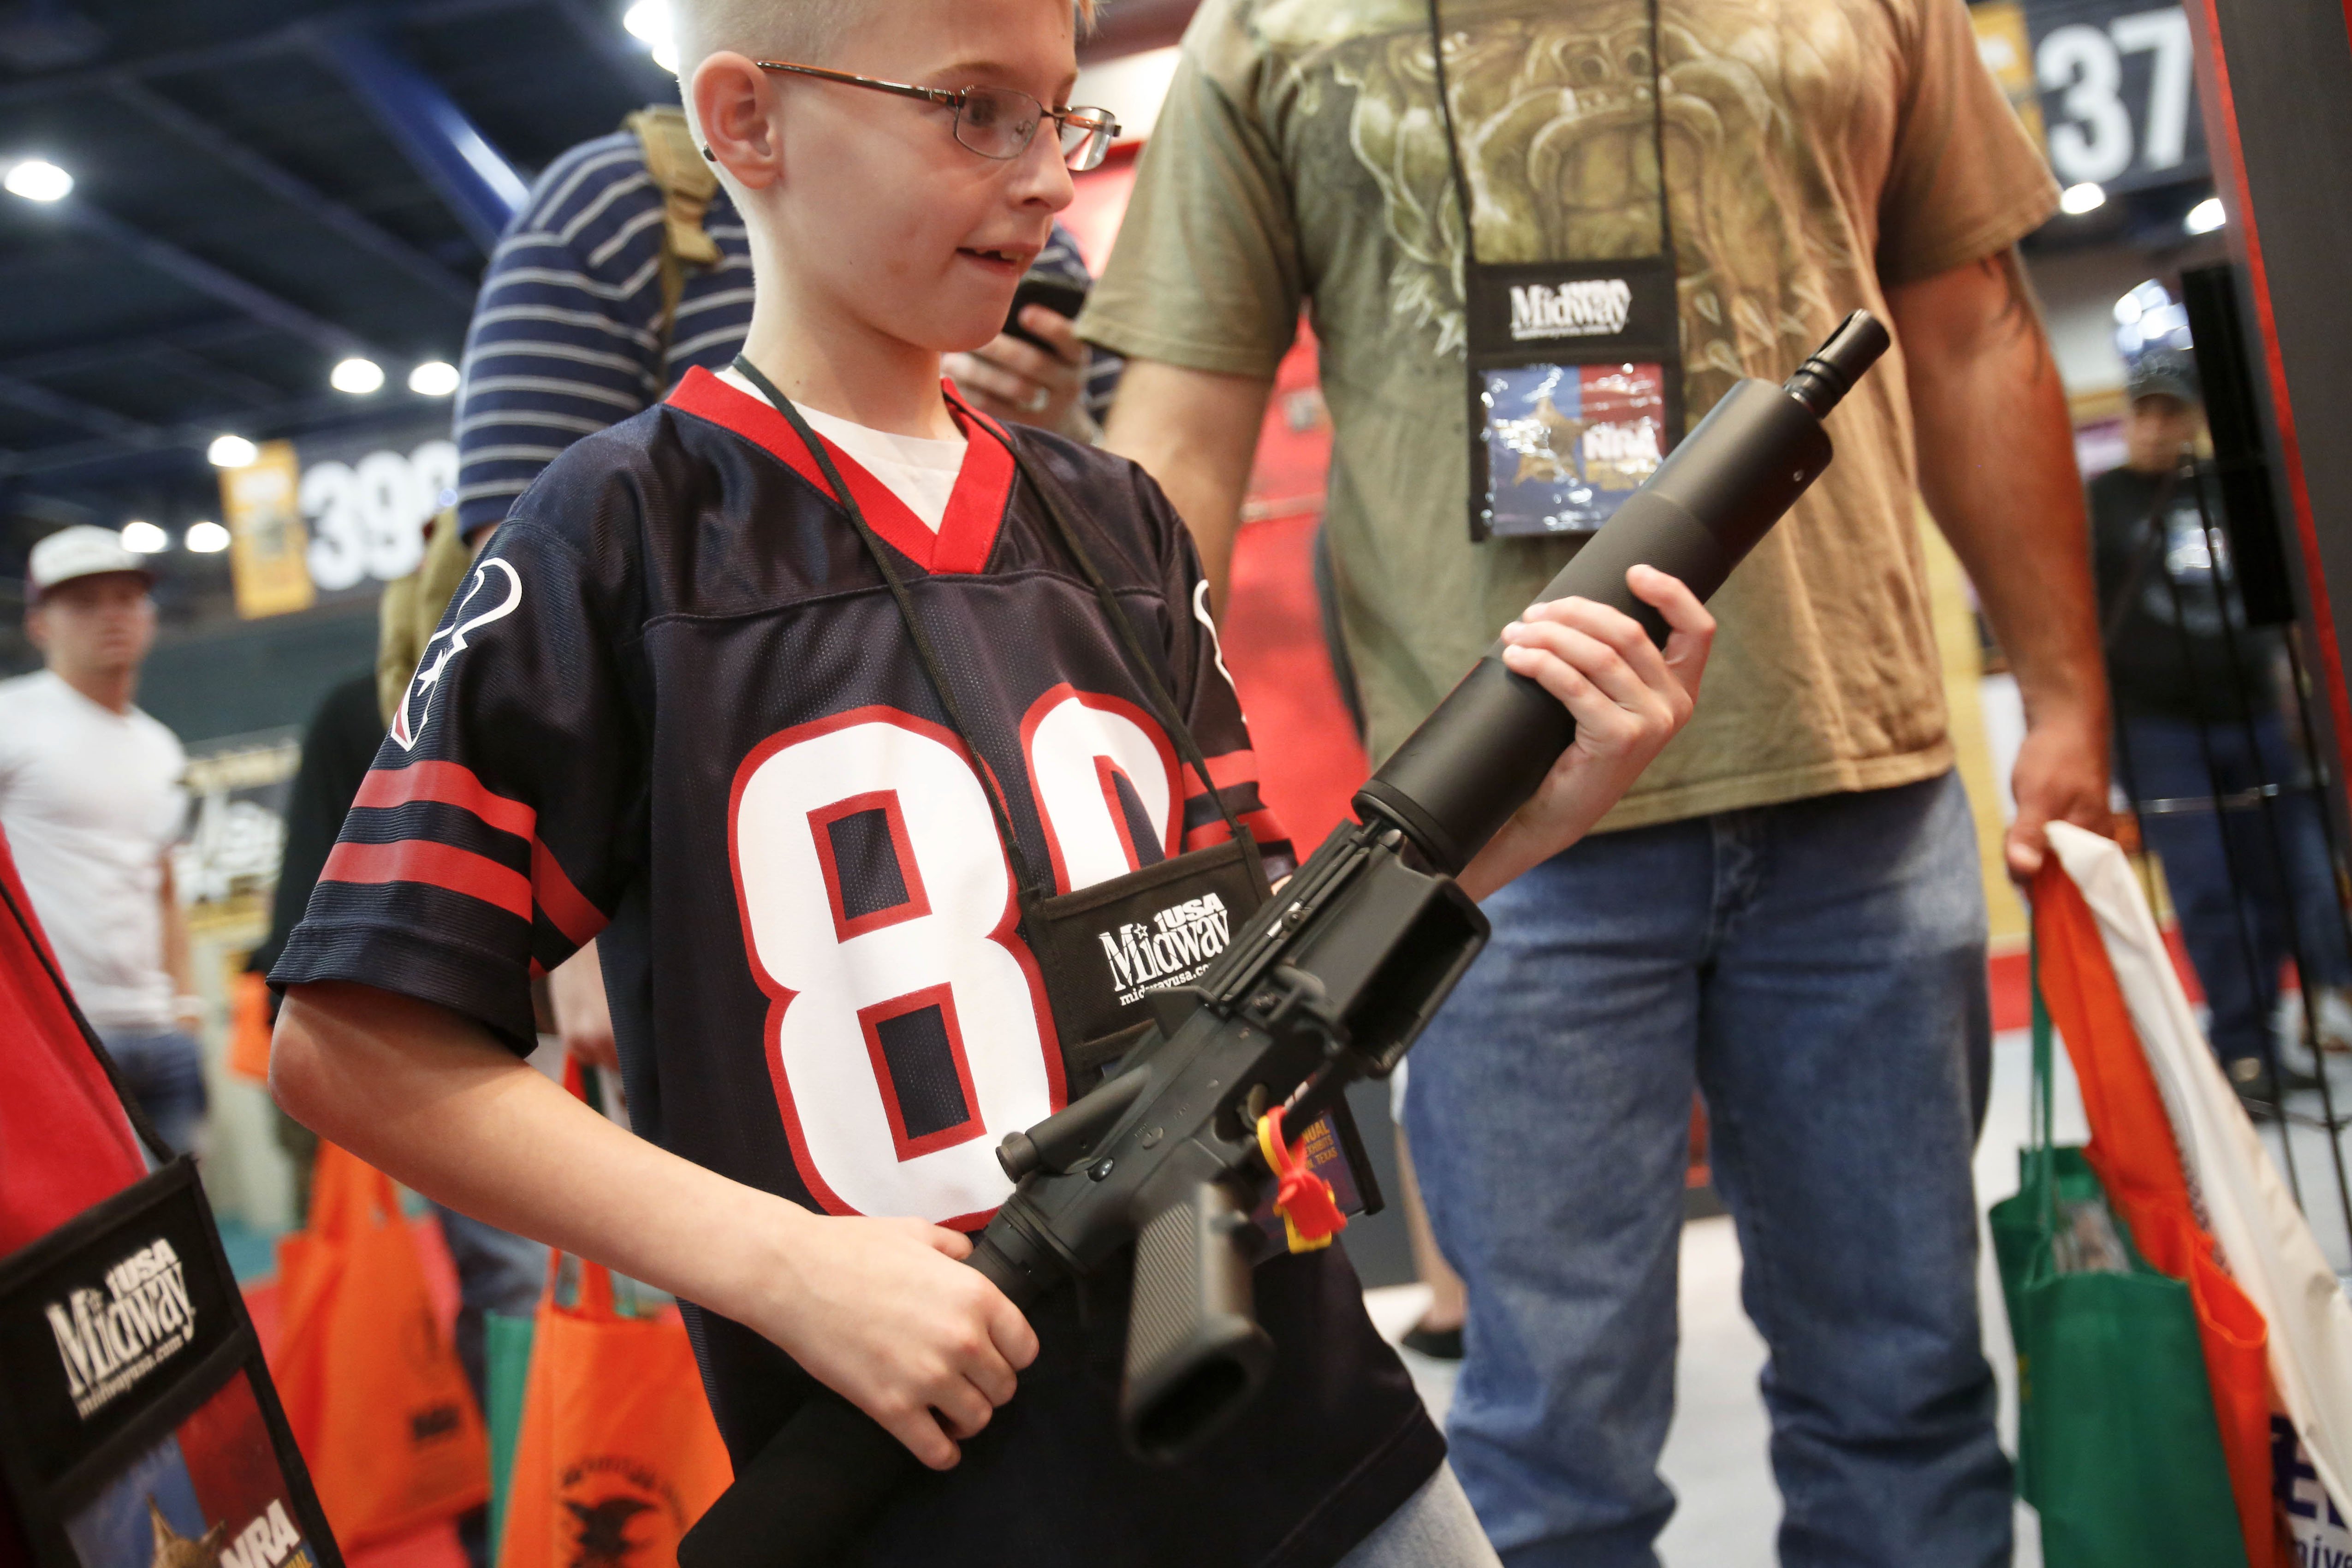 Tyler Rusch, 9, looks at an AR-15 style rifle on display during the National Rifle Association's annual convention last year. Photo: The New York Times